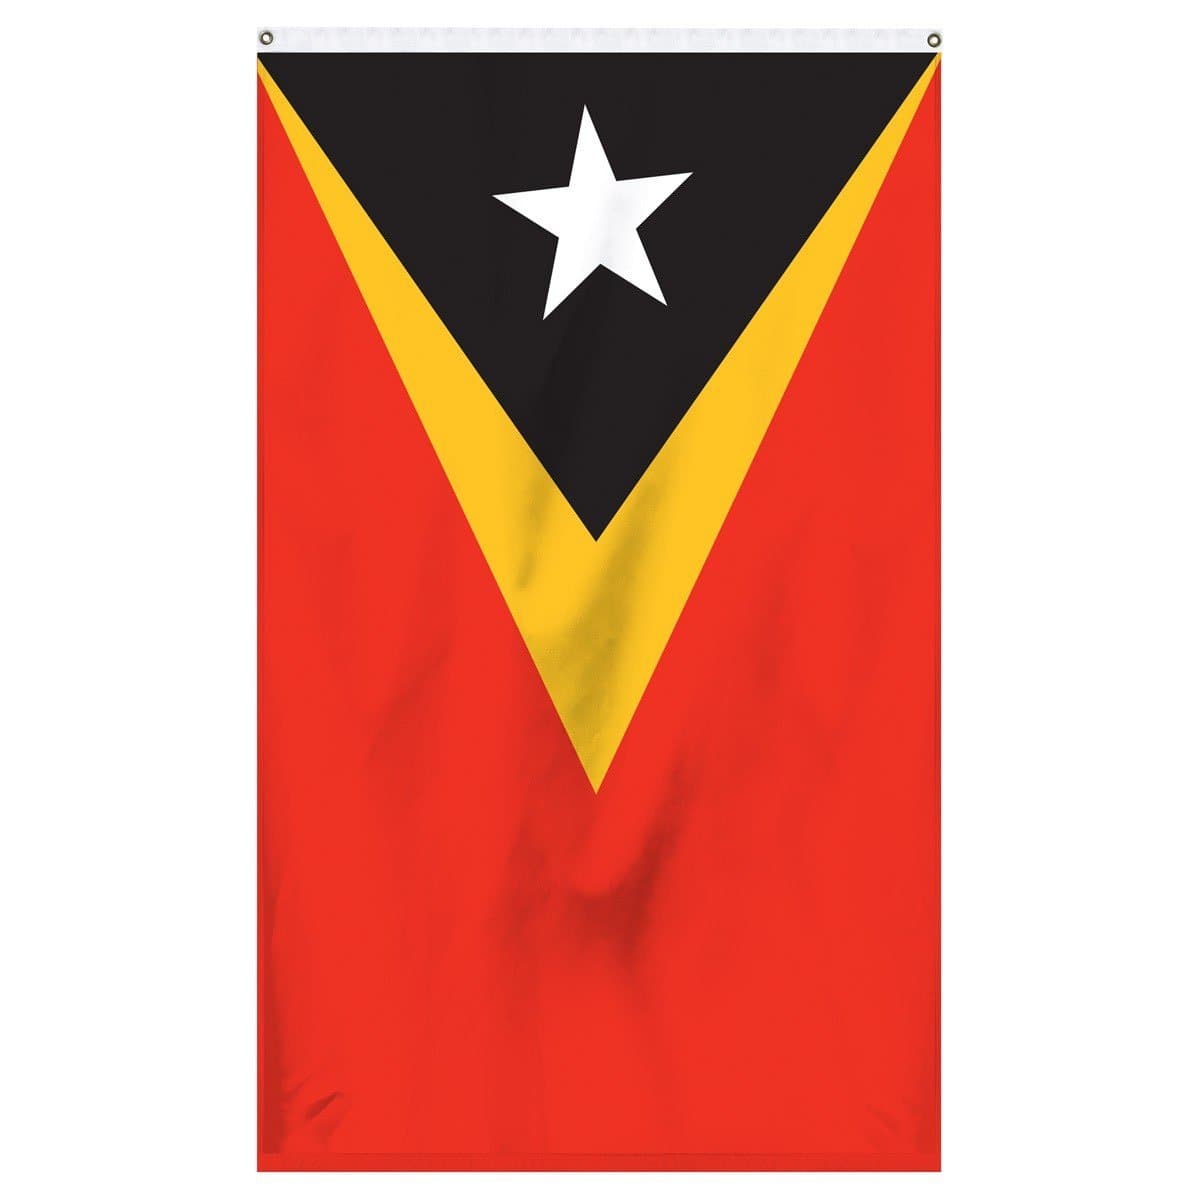 The national flag of East Timor for sale